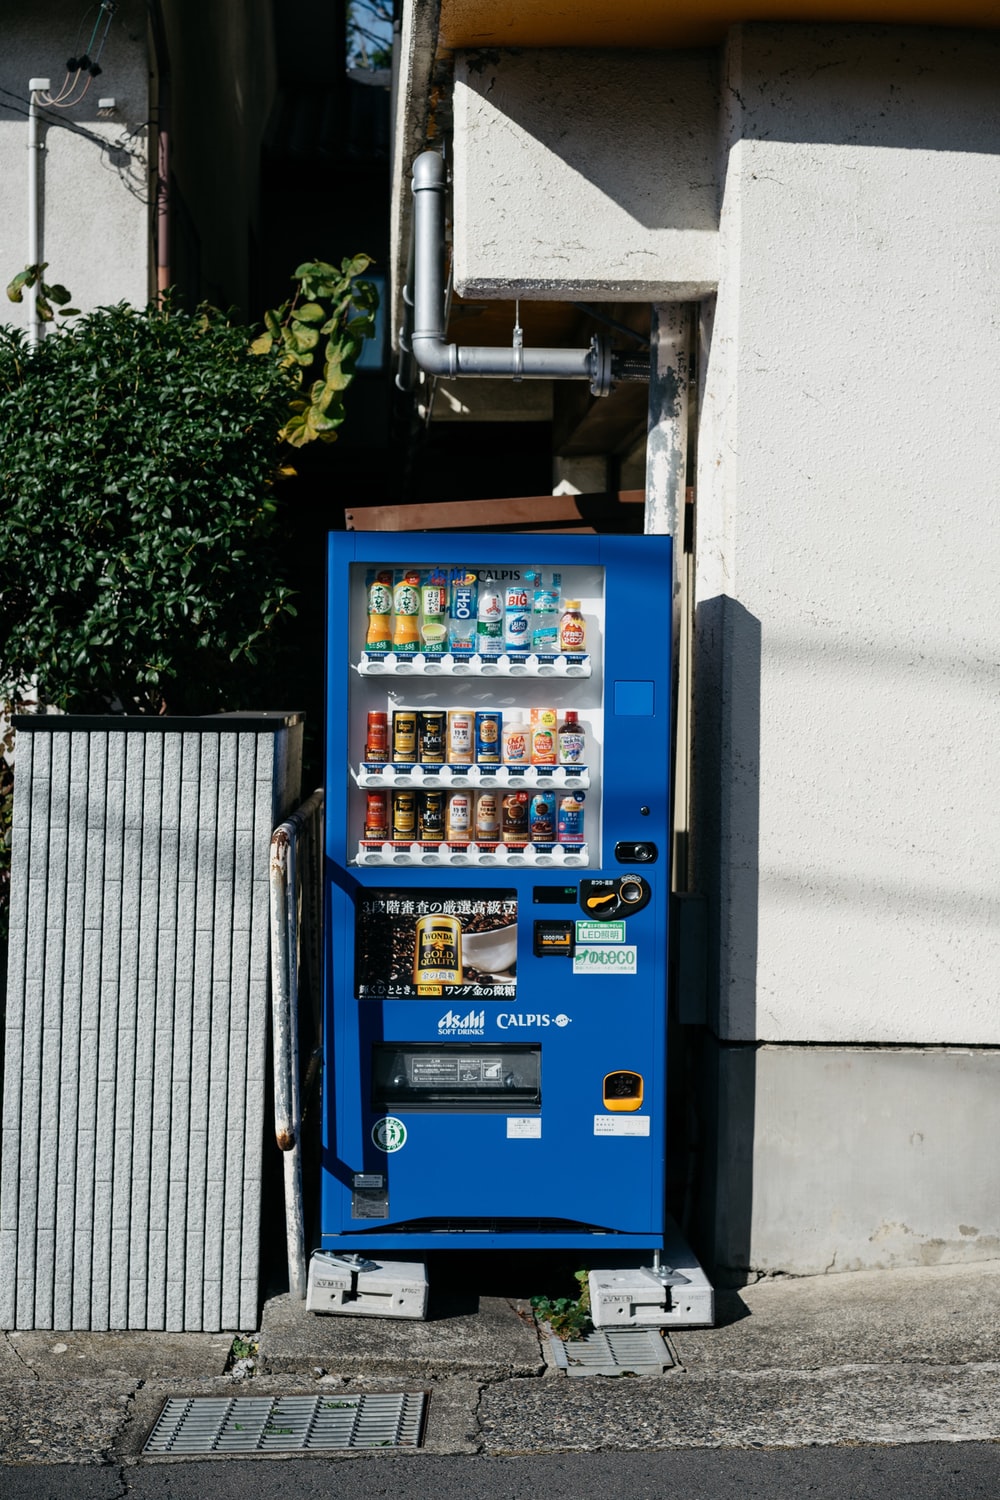 Vending Machine Picture. Download Free Image